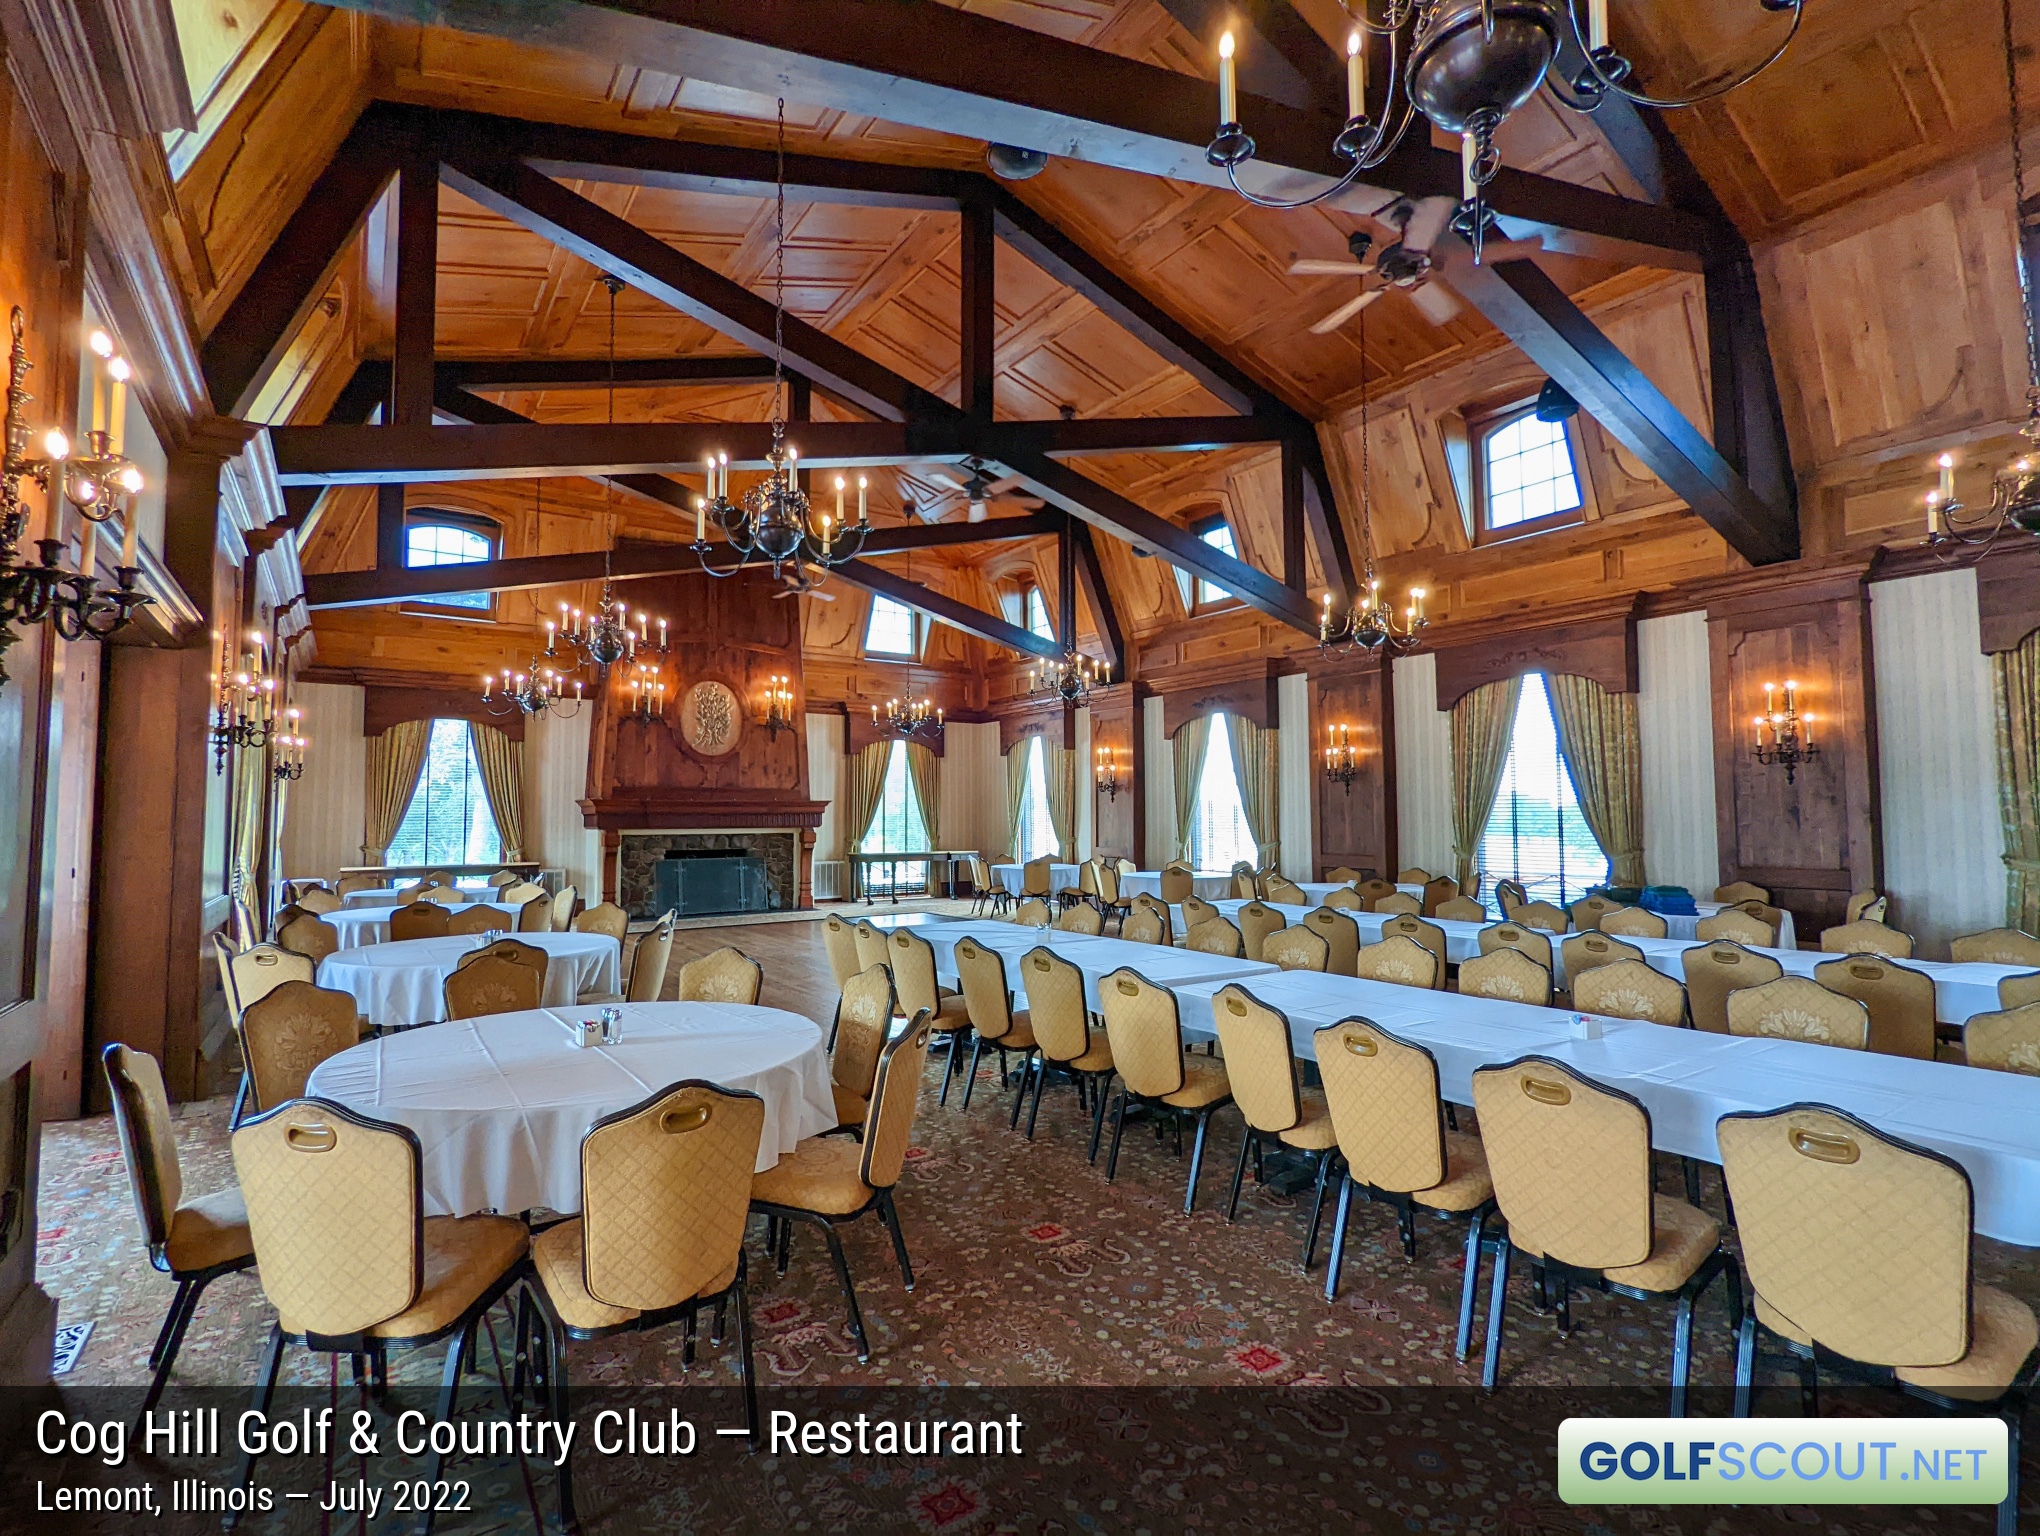 Photo of the restaurant at Cog Hill Course #1 in Lemont, Illinois. Cog Hill's main dining hall has 30 foot ceilings.